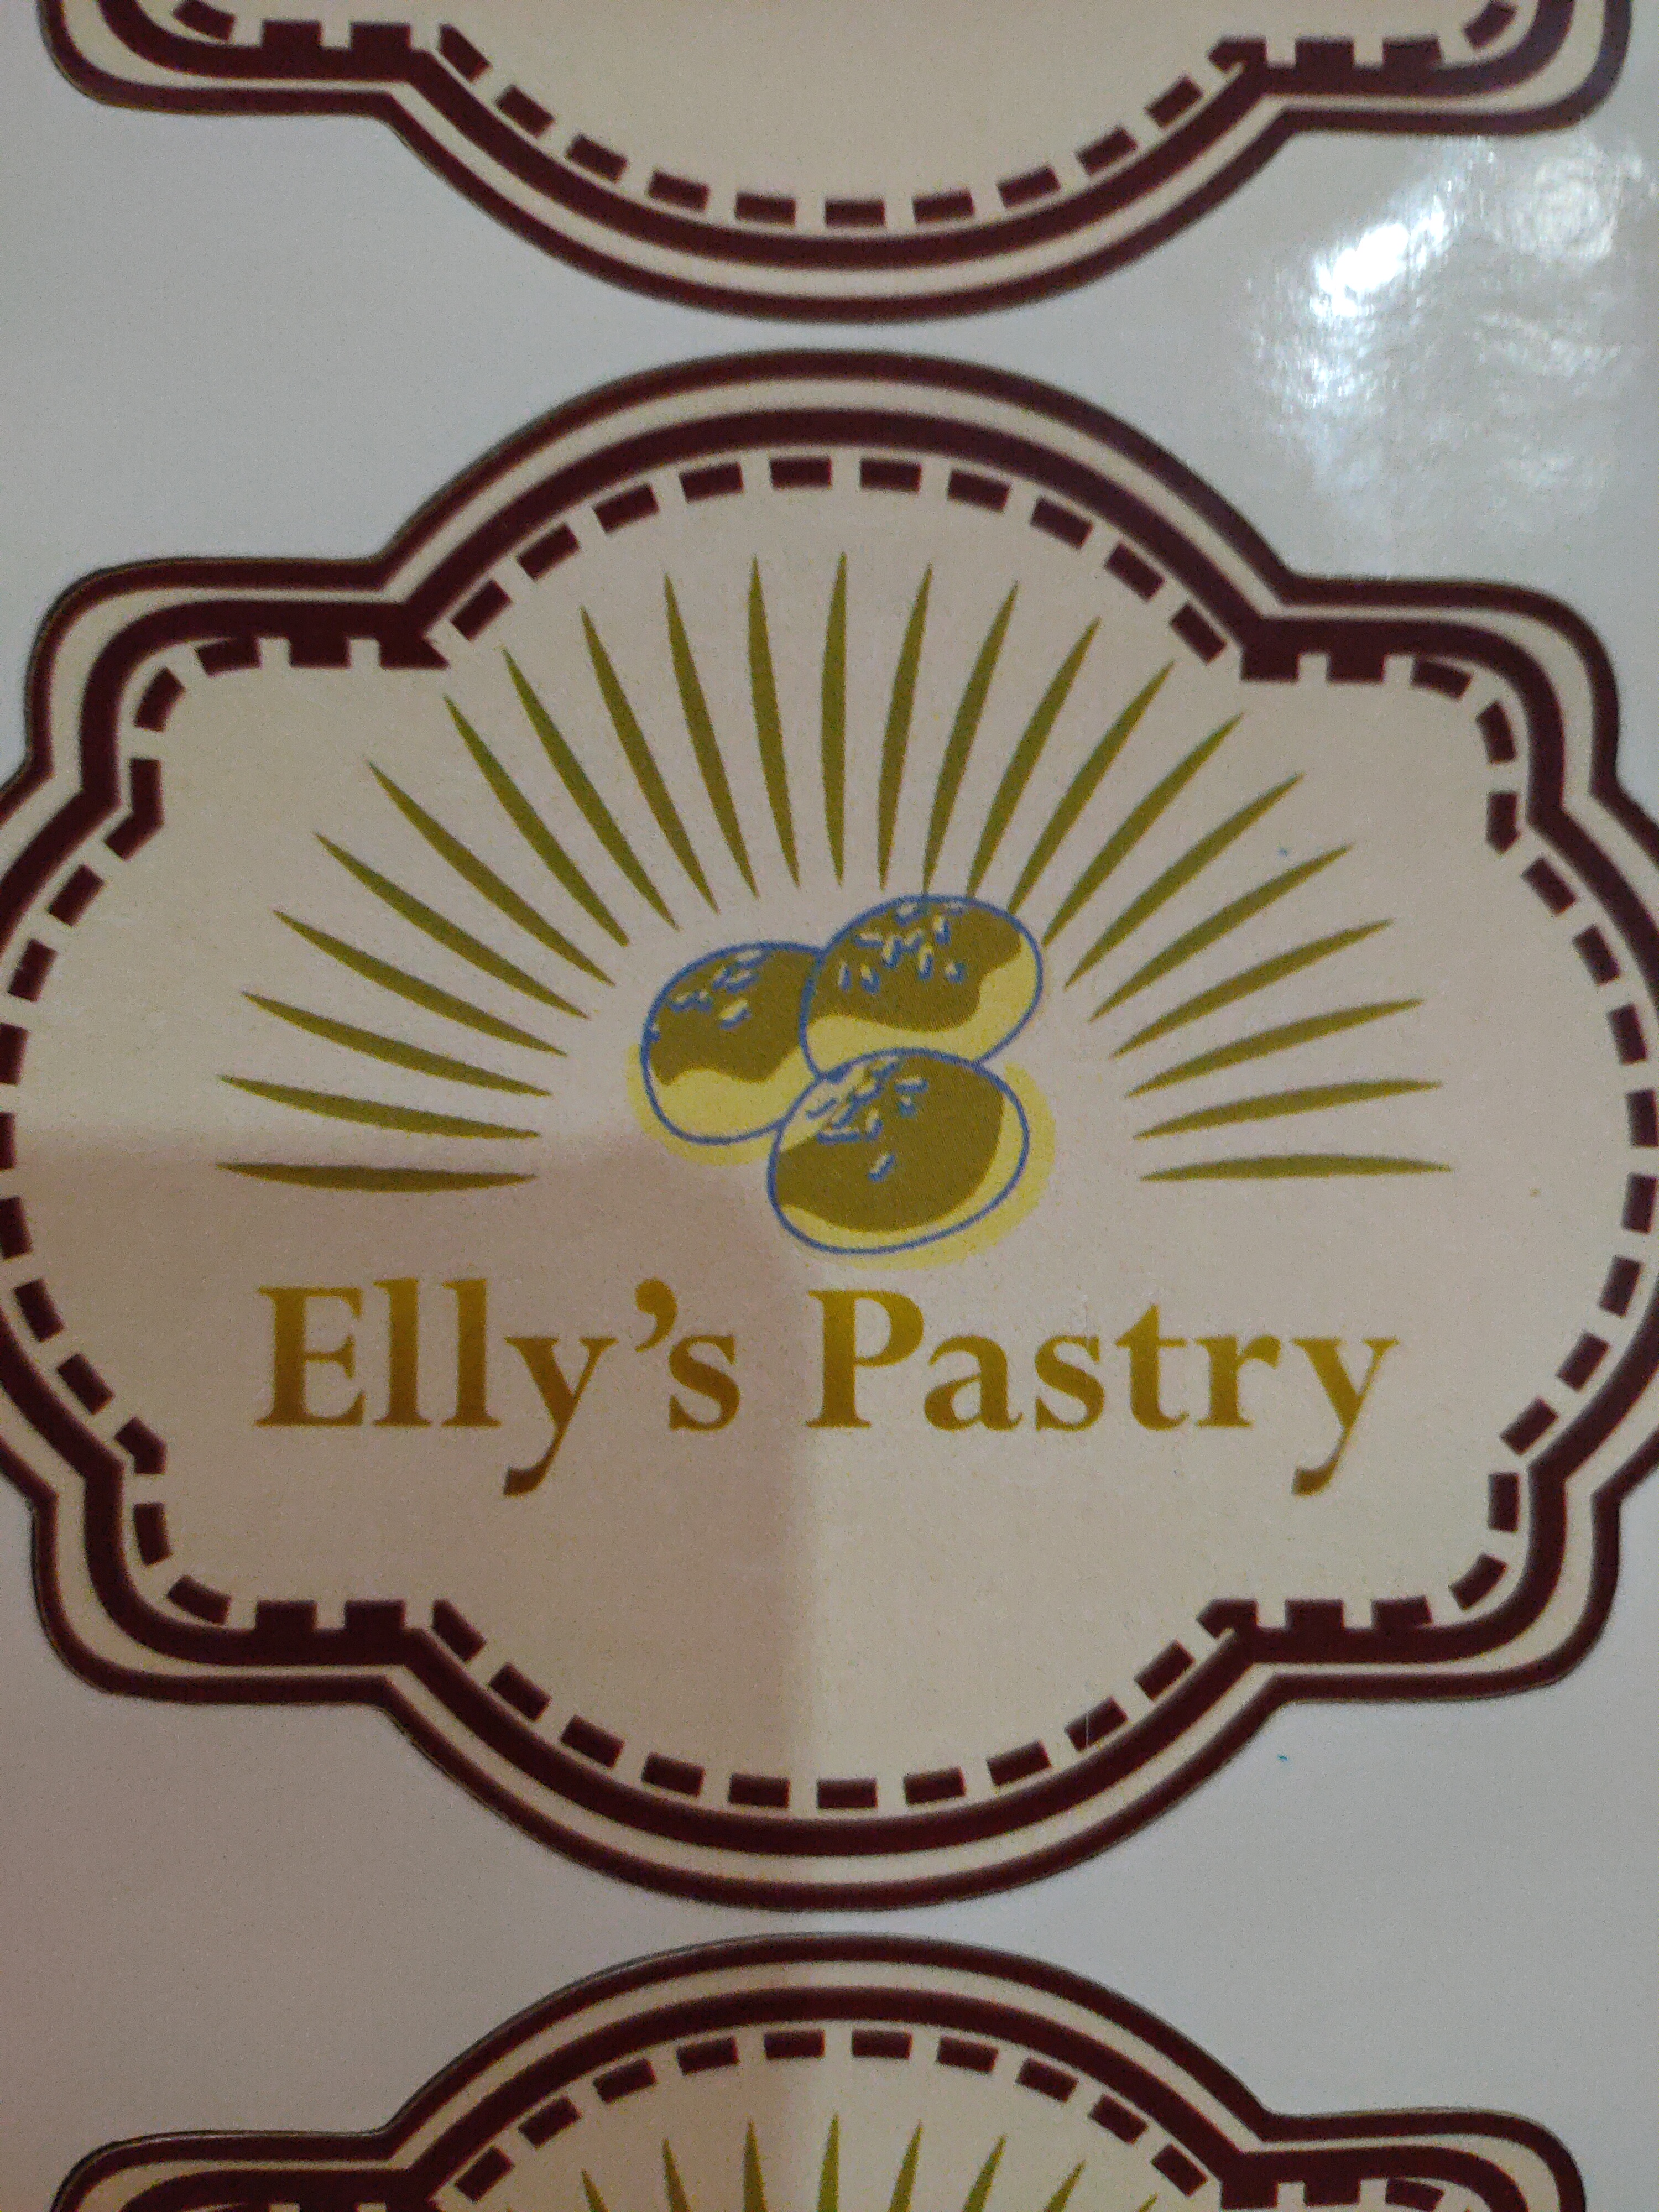 Elly's Pastry